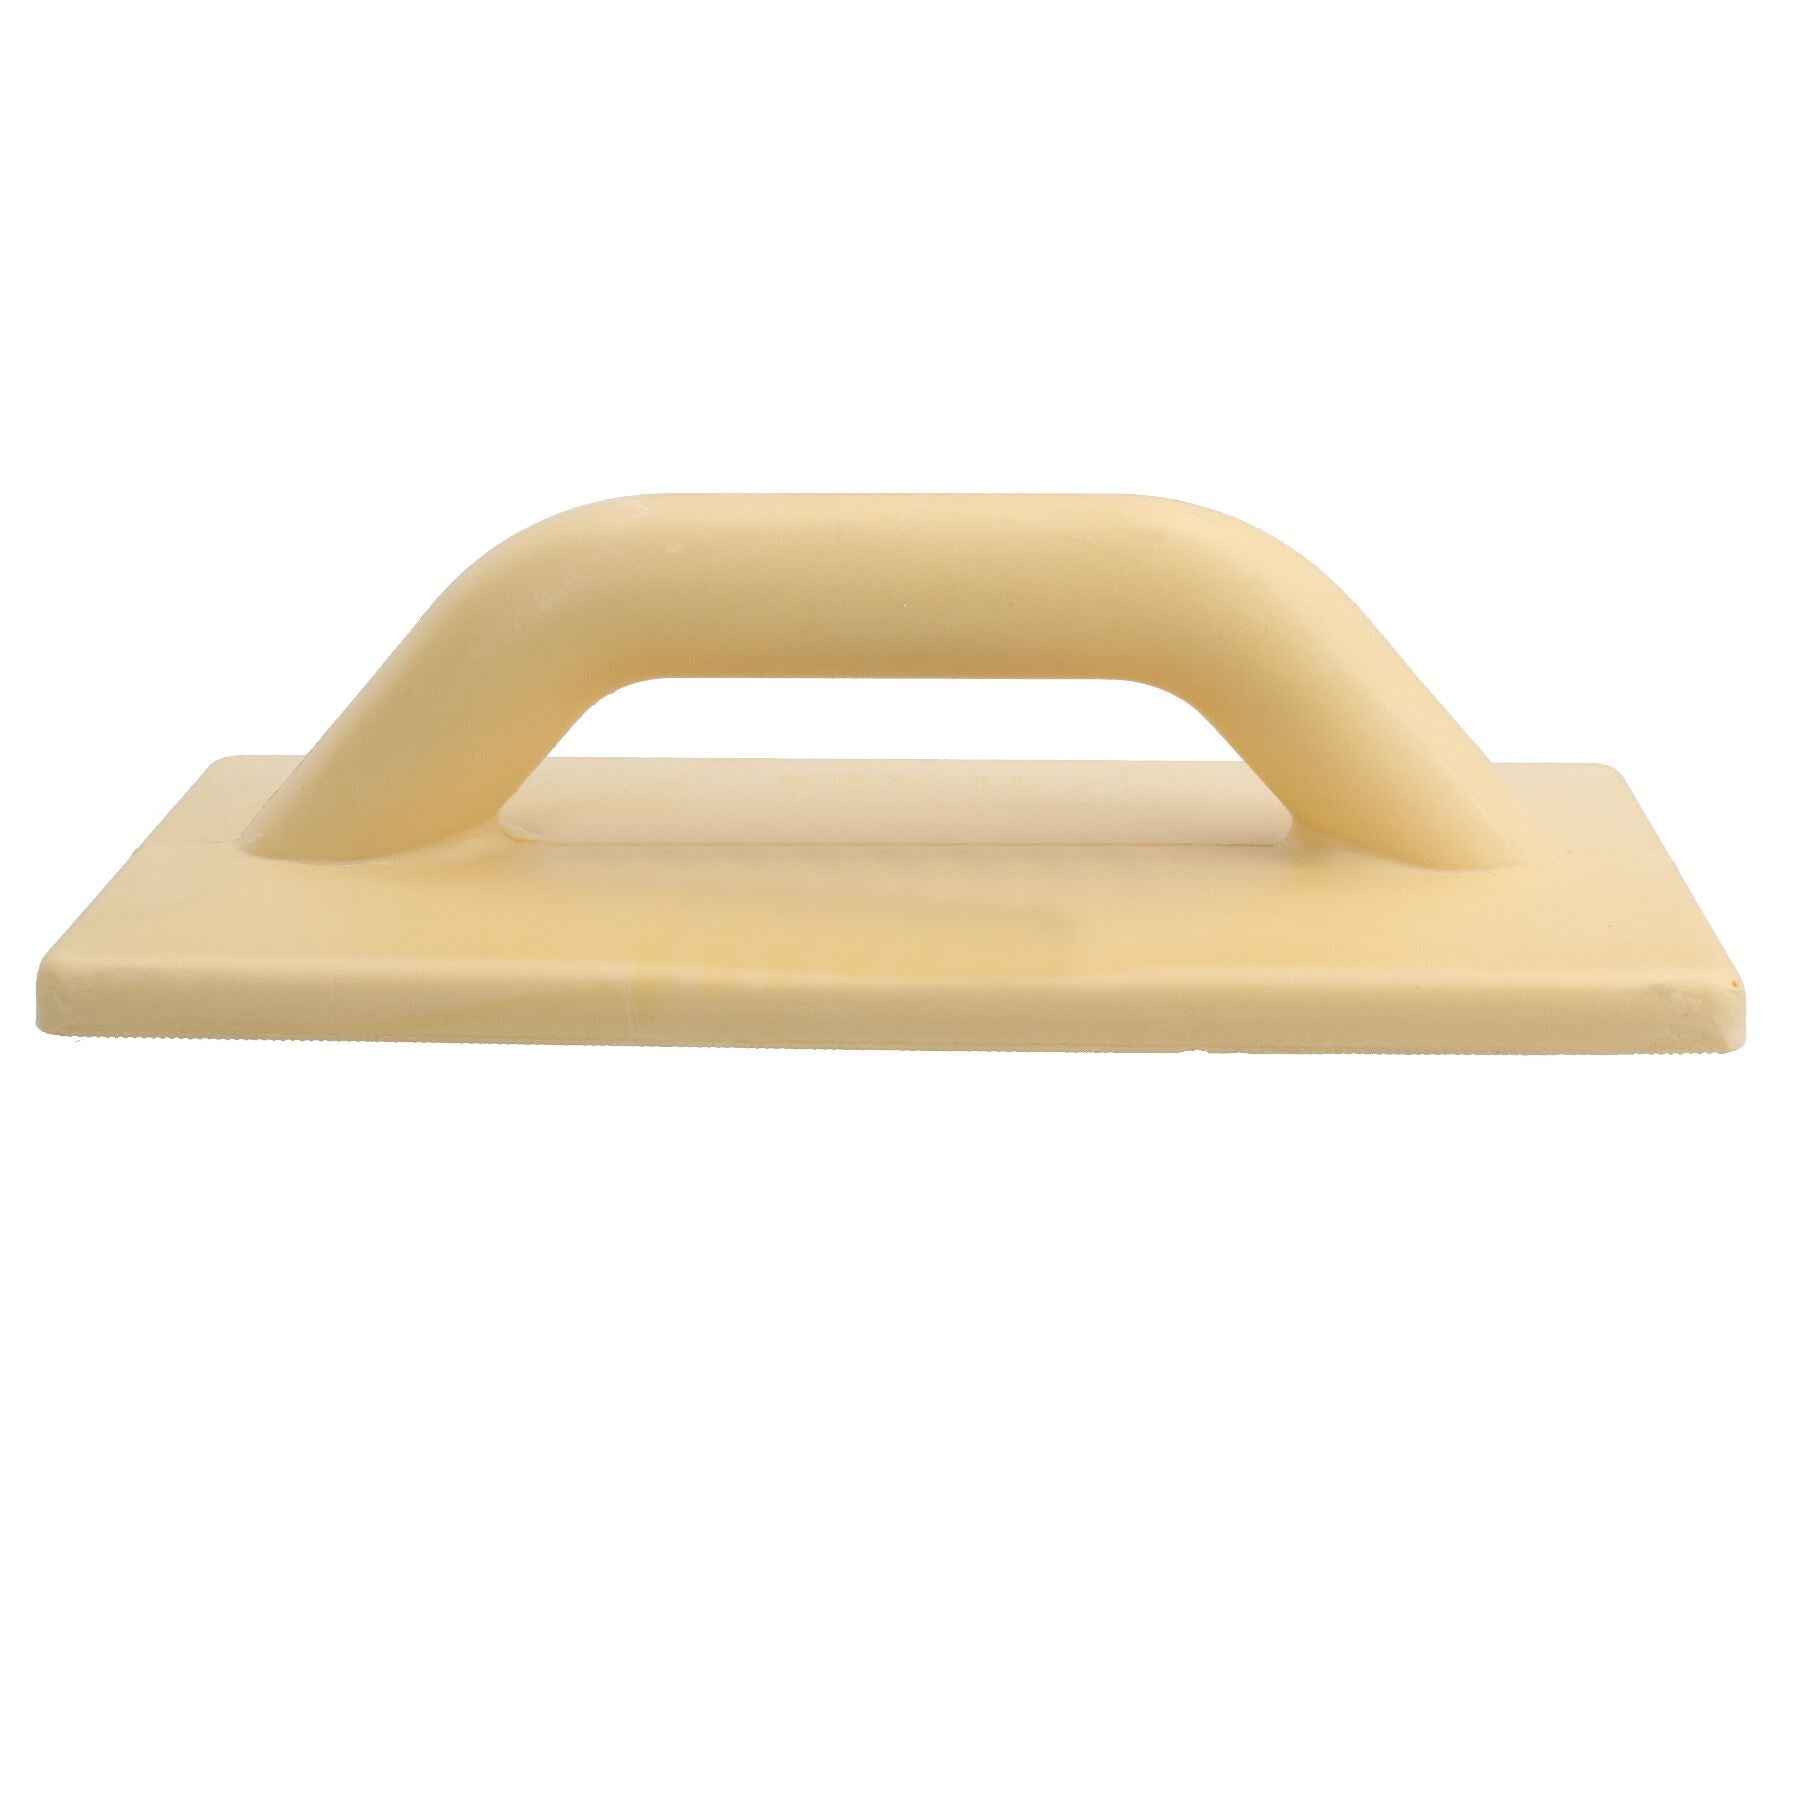 Plastering Plasterers Poly Float Rendering Smoothing Cement Plaster 280 x 110mm